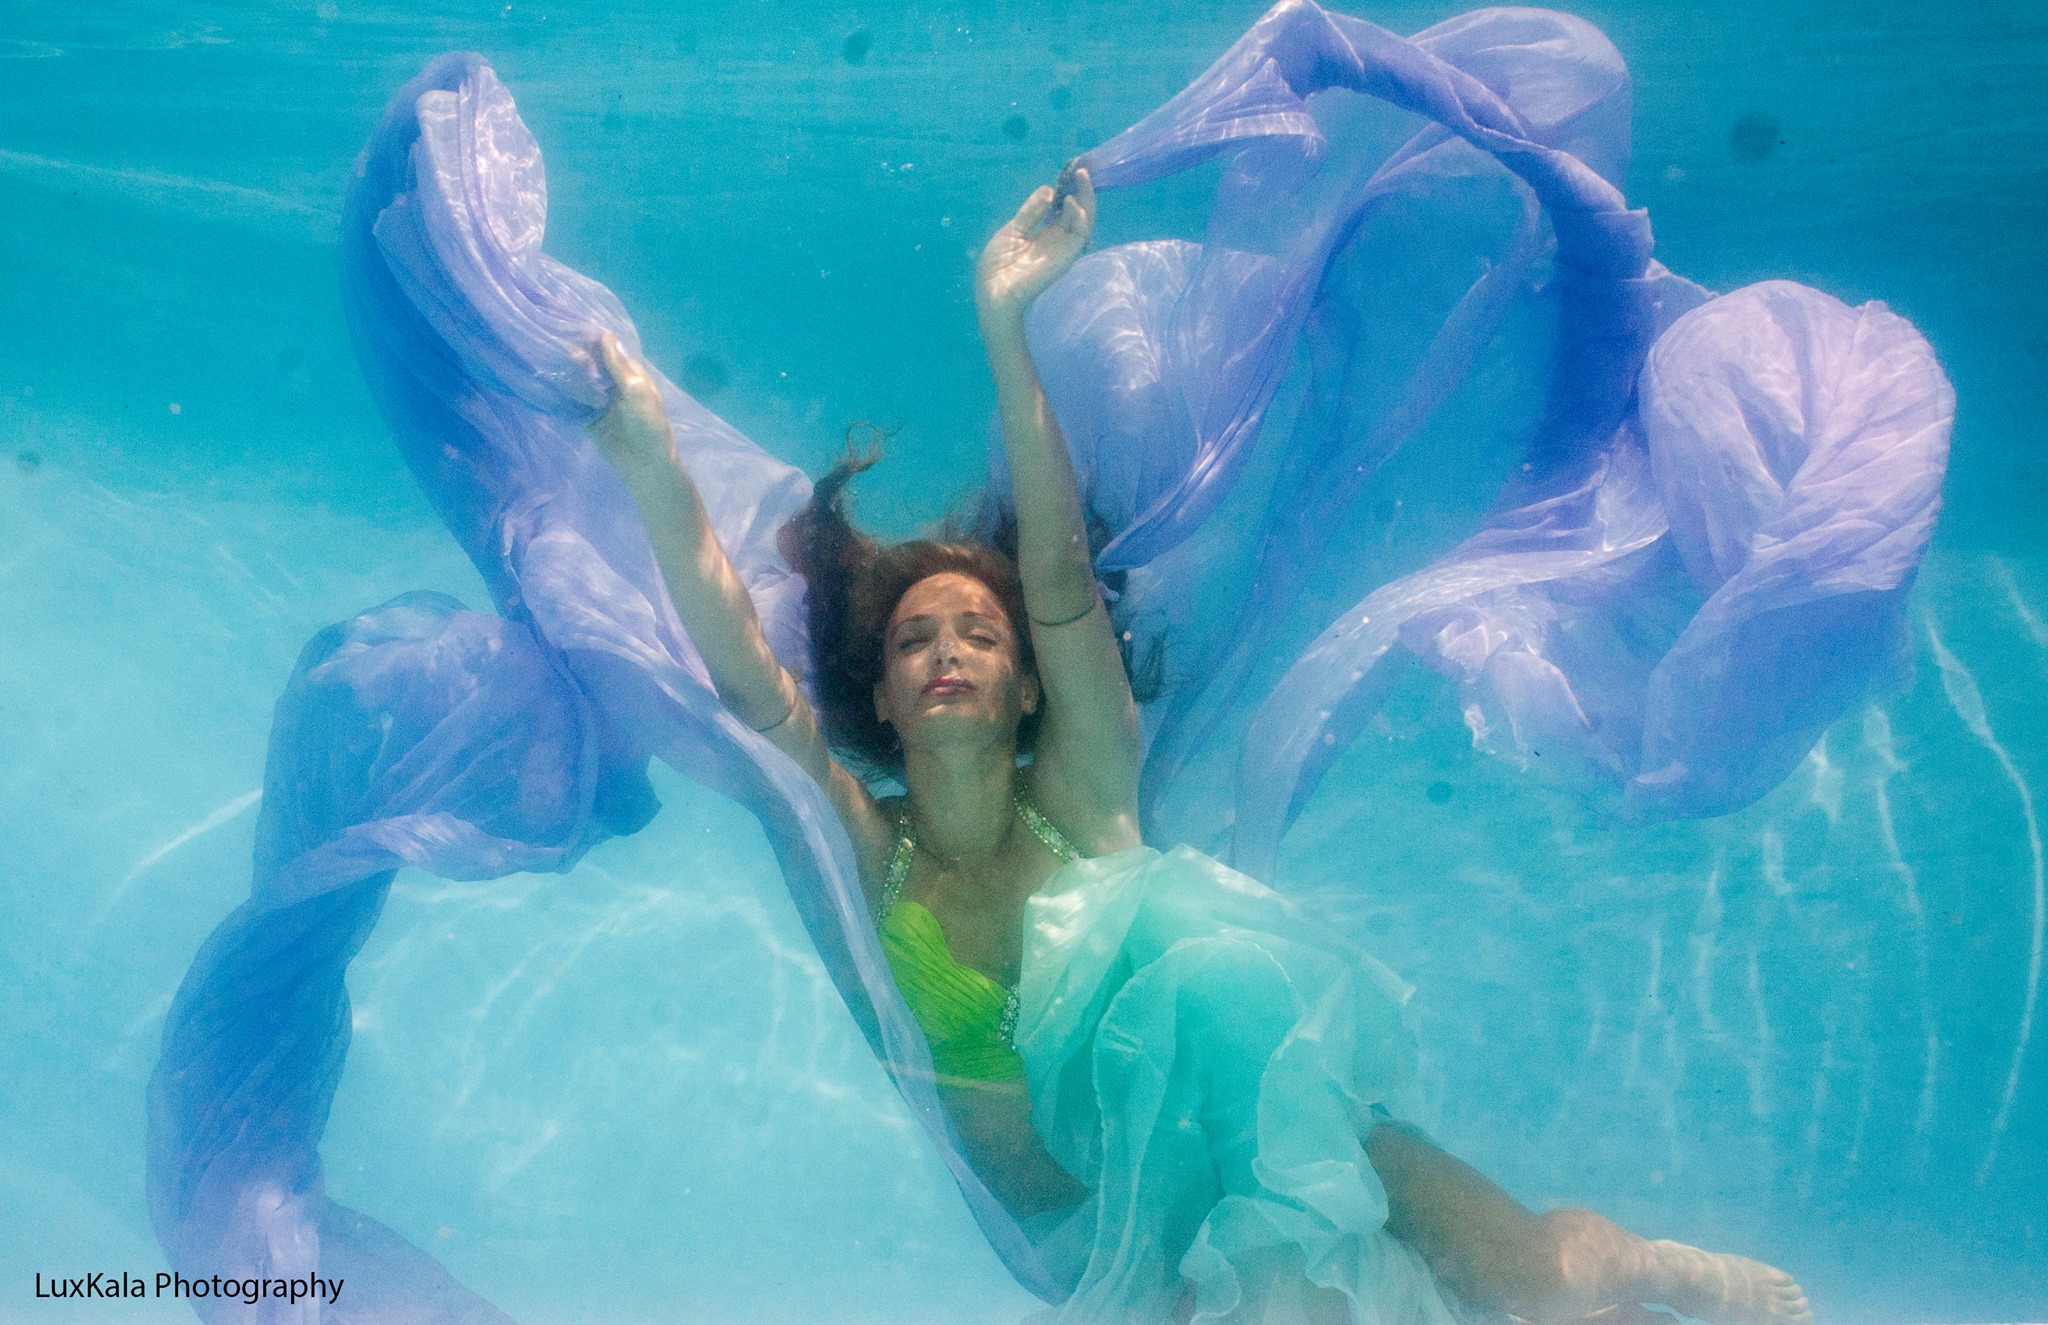 Theresa enjoys being in water and has even completed 2 underwater photoshoots. She has been told she is a natural.